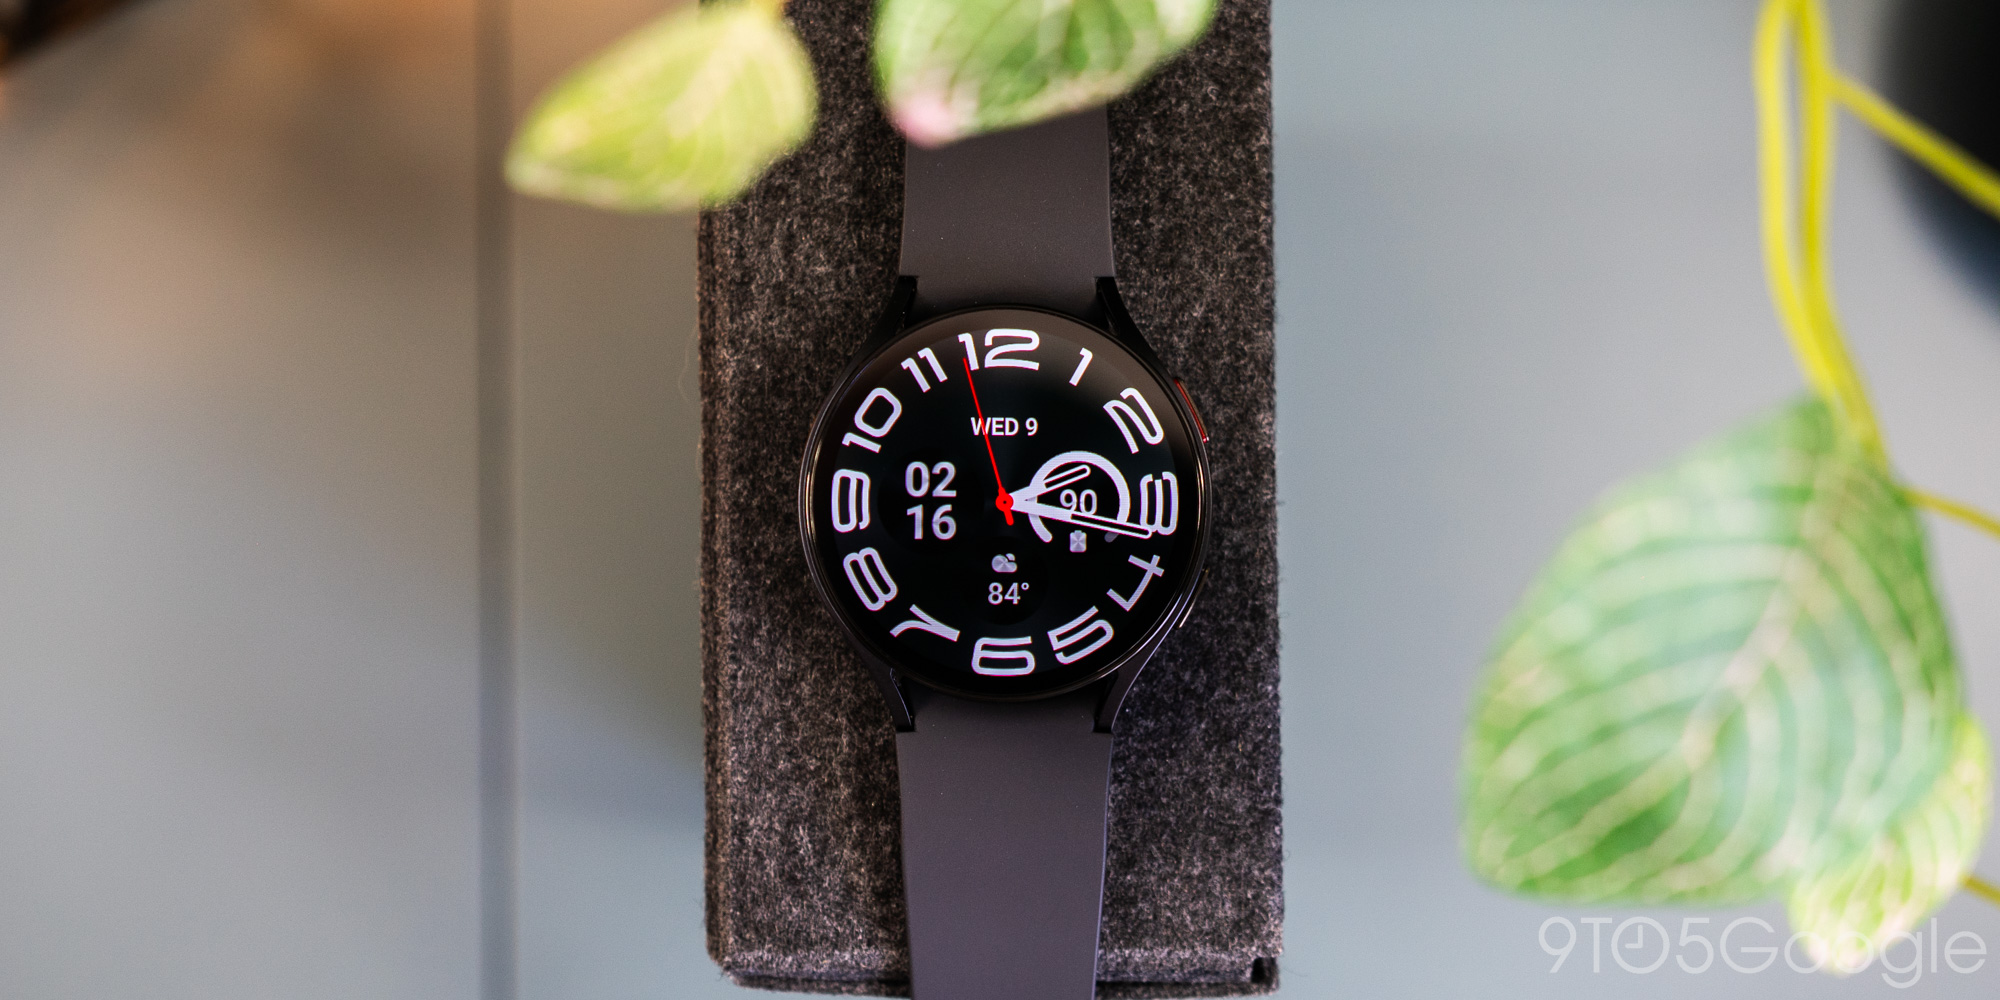 Amazfit GTR Mini review: Ginormous battery inside a petite wearable